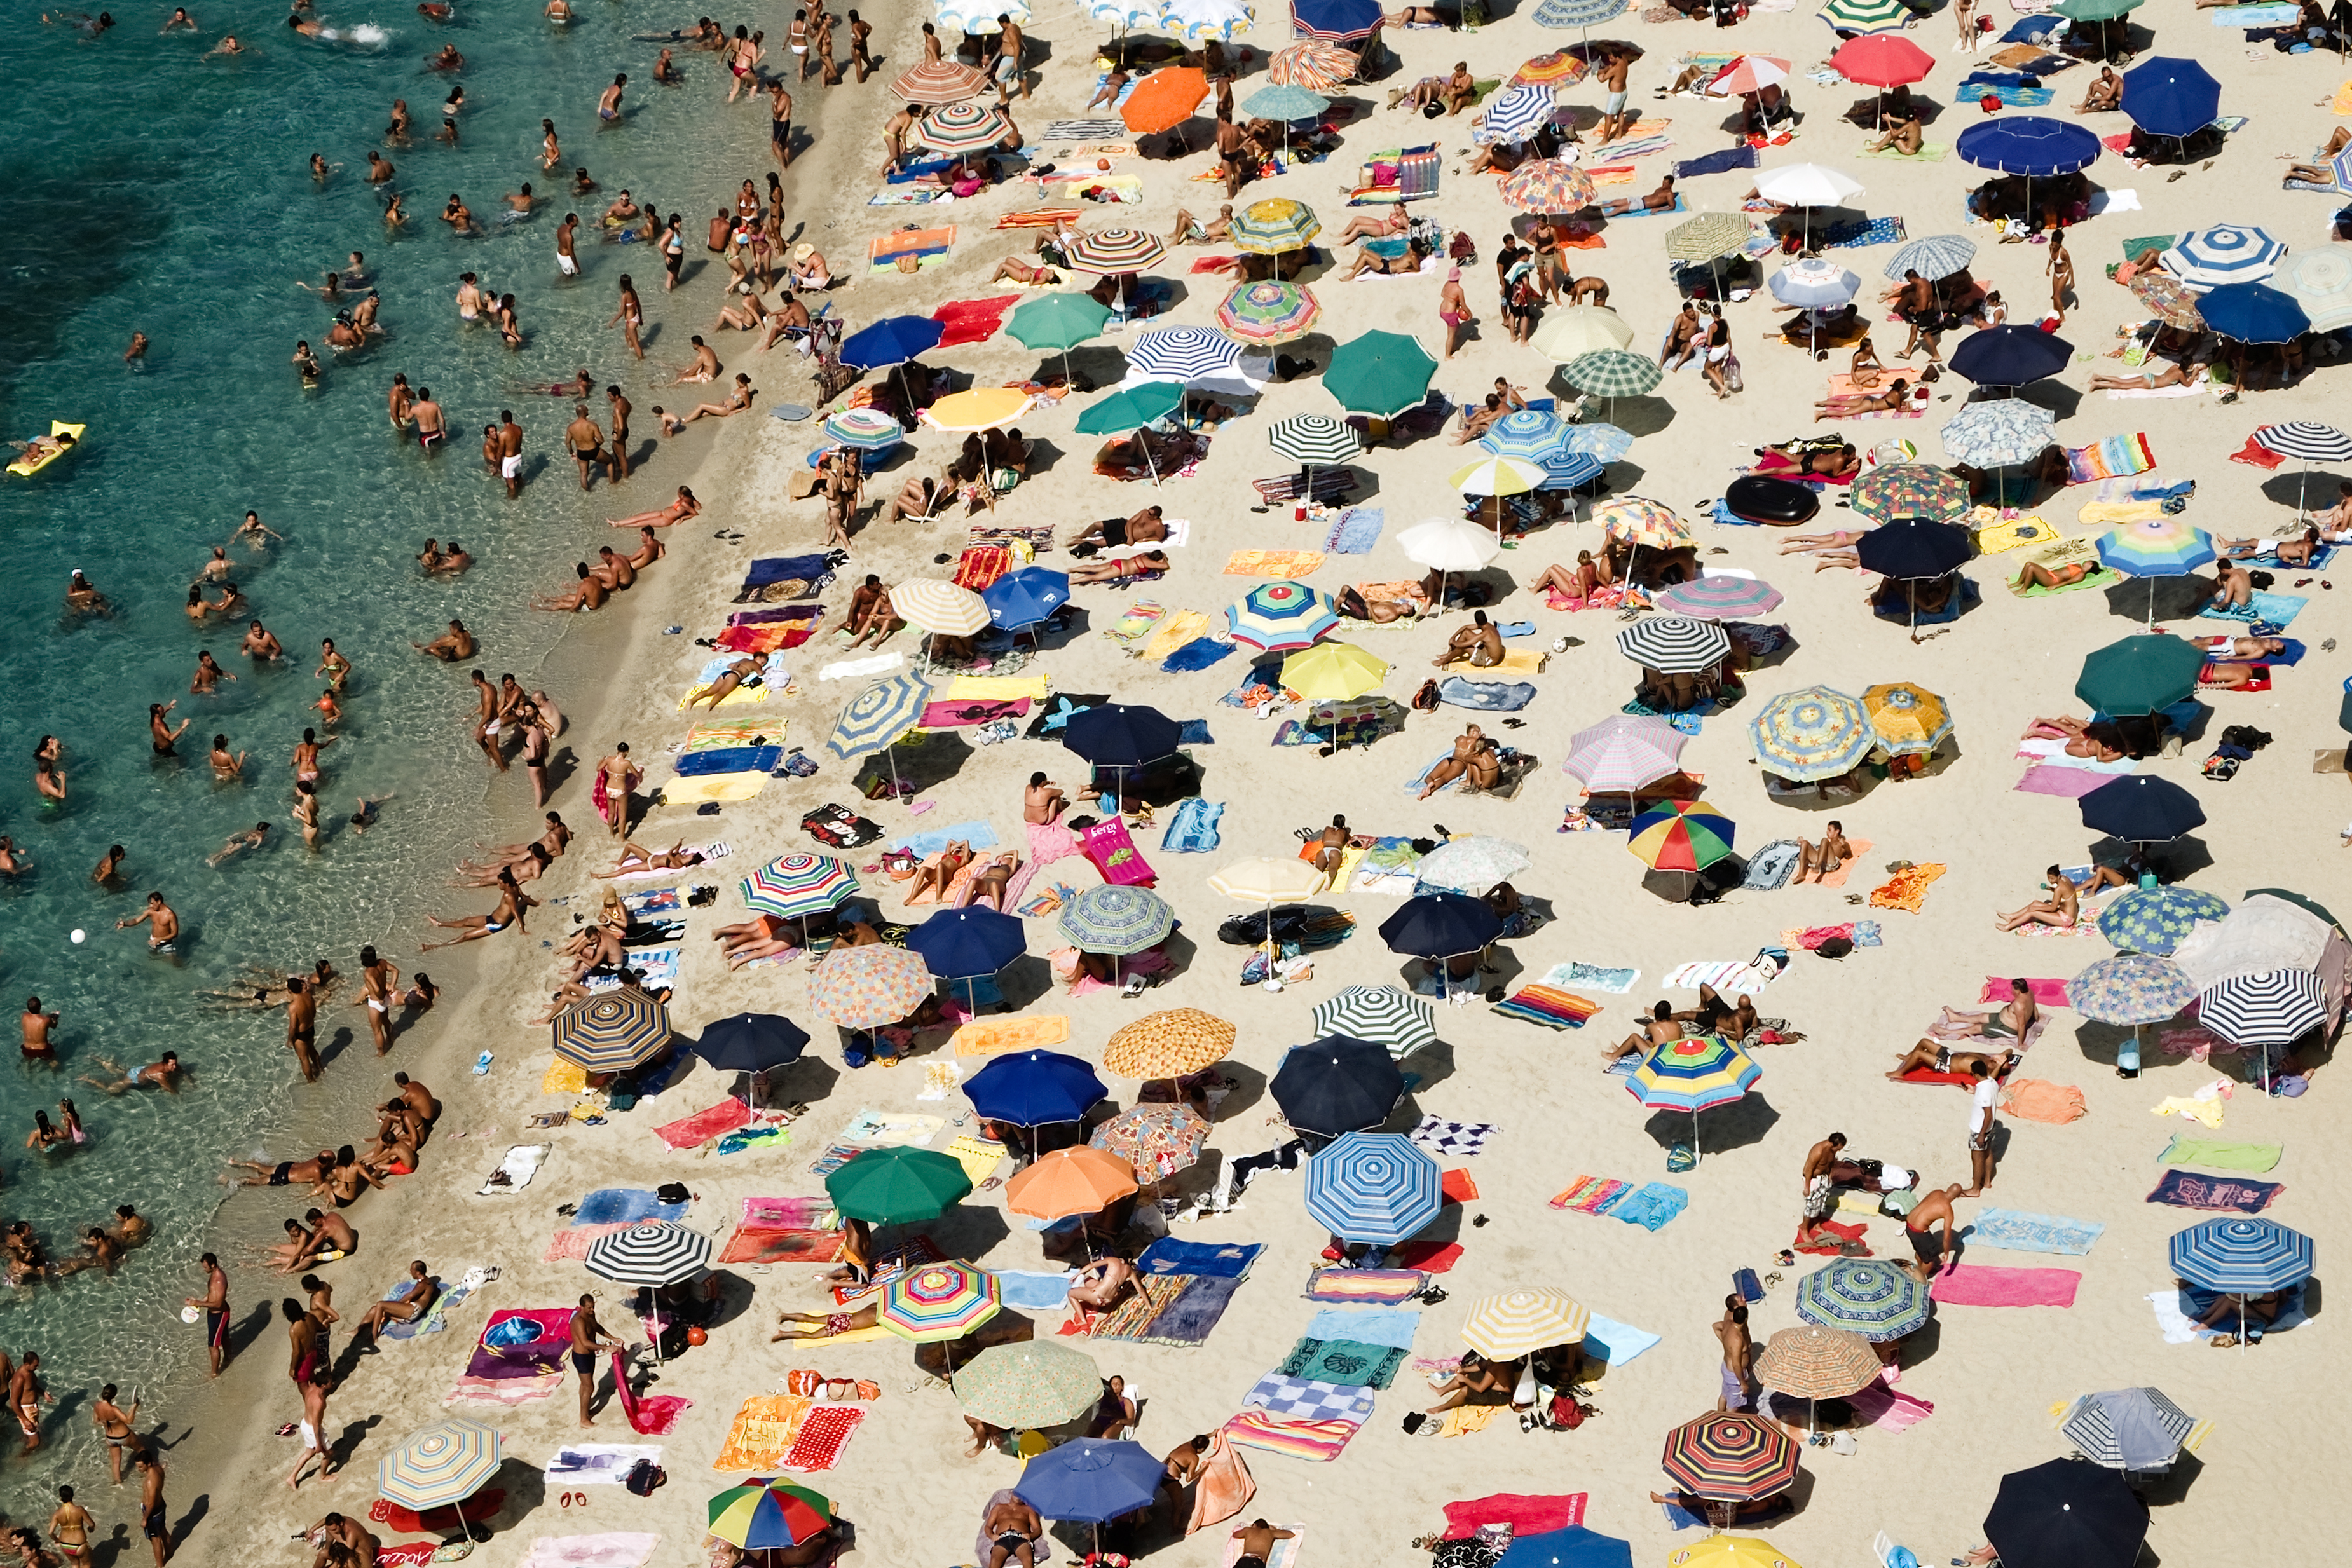 Peoples with umbrella enjoying on beach, Italy. (Marco Casse—Getty Images)